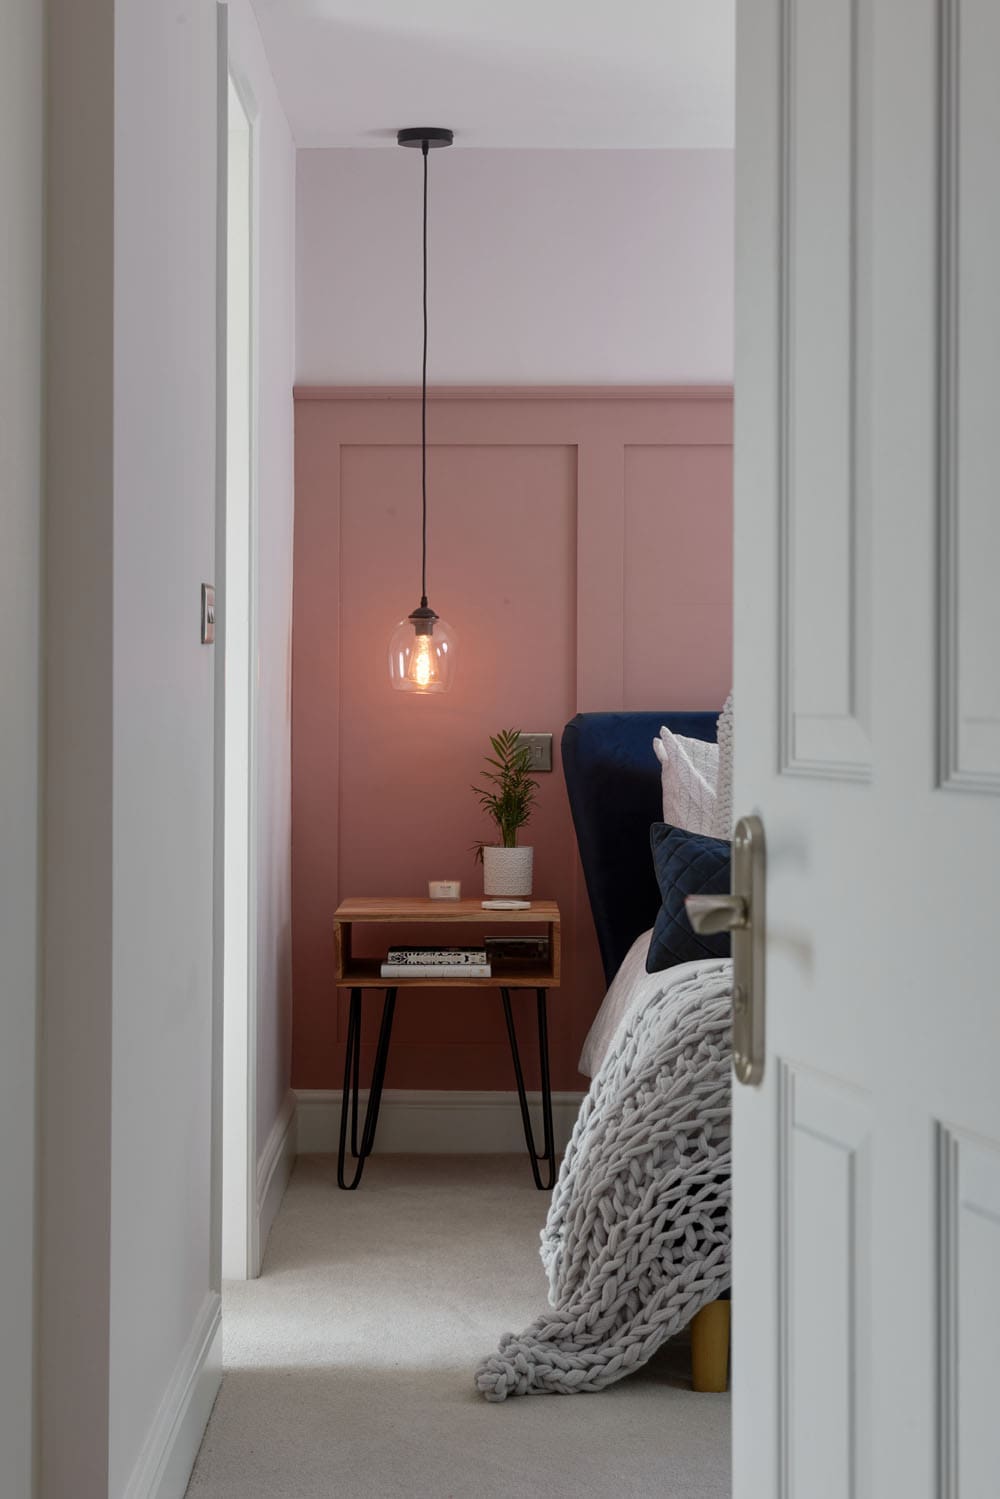 rear dormer loft conversion bedroom with pink wall panelling and modern interior